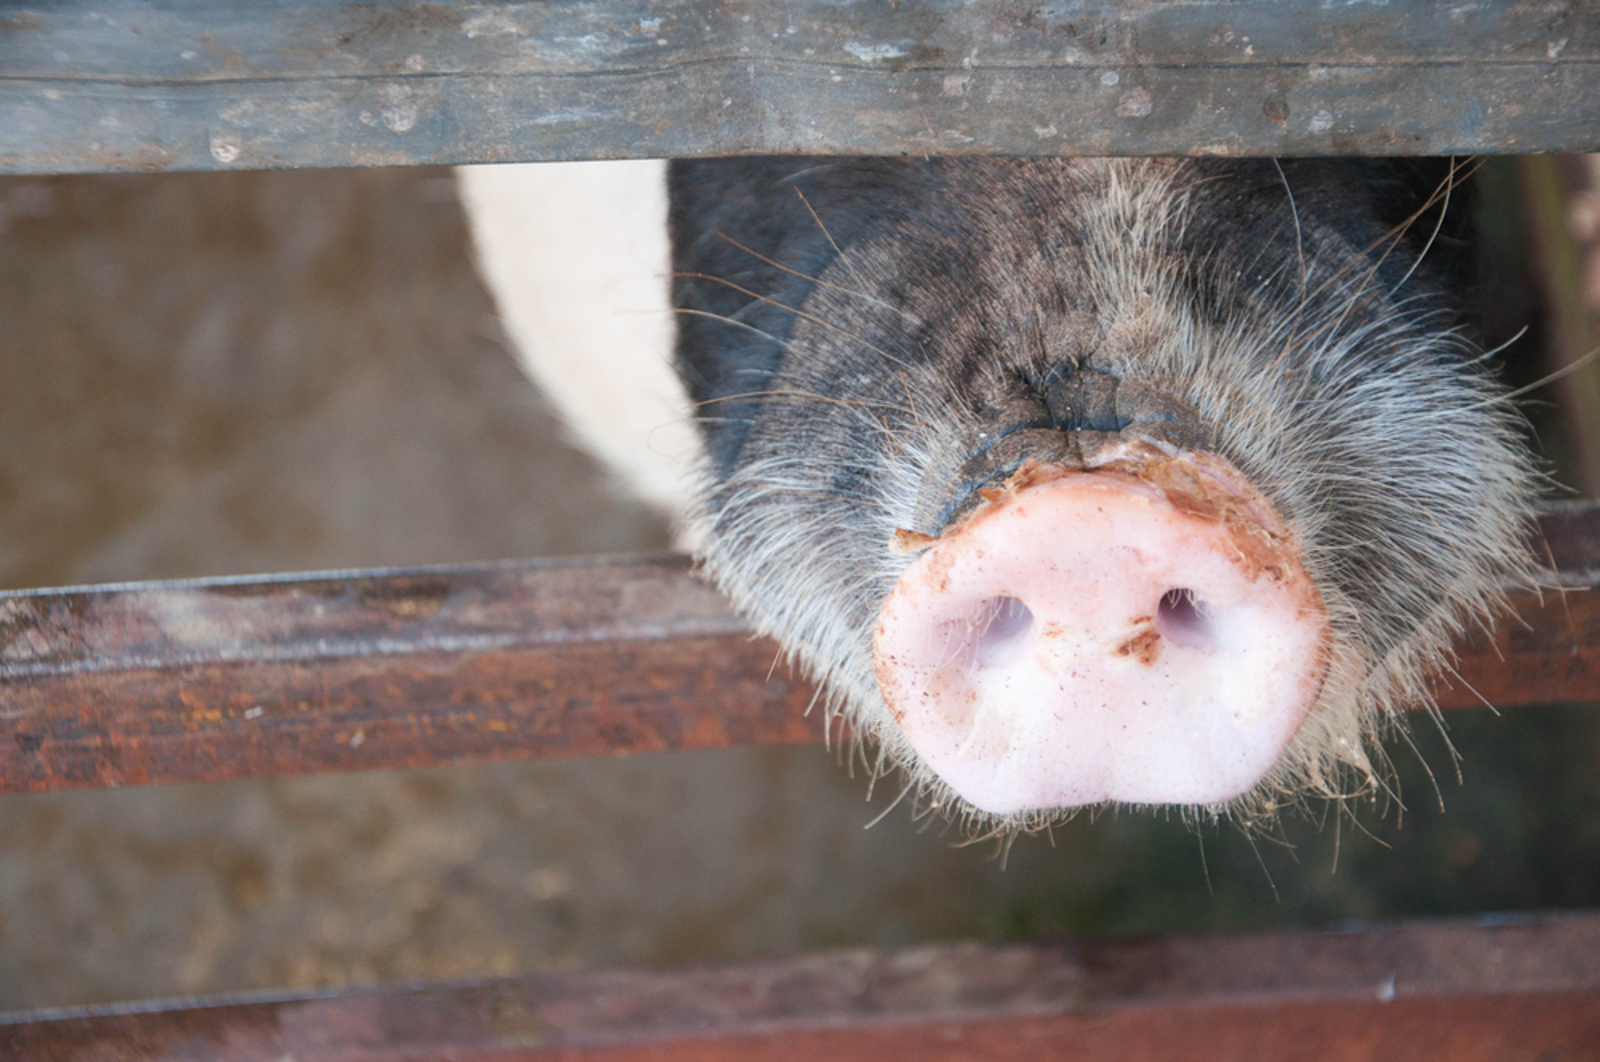 This Movement is Helping Factory Farm Animals By Exposing Their Suffering for the World to See